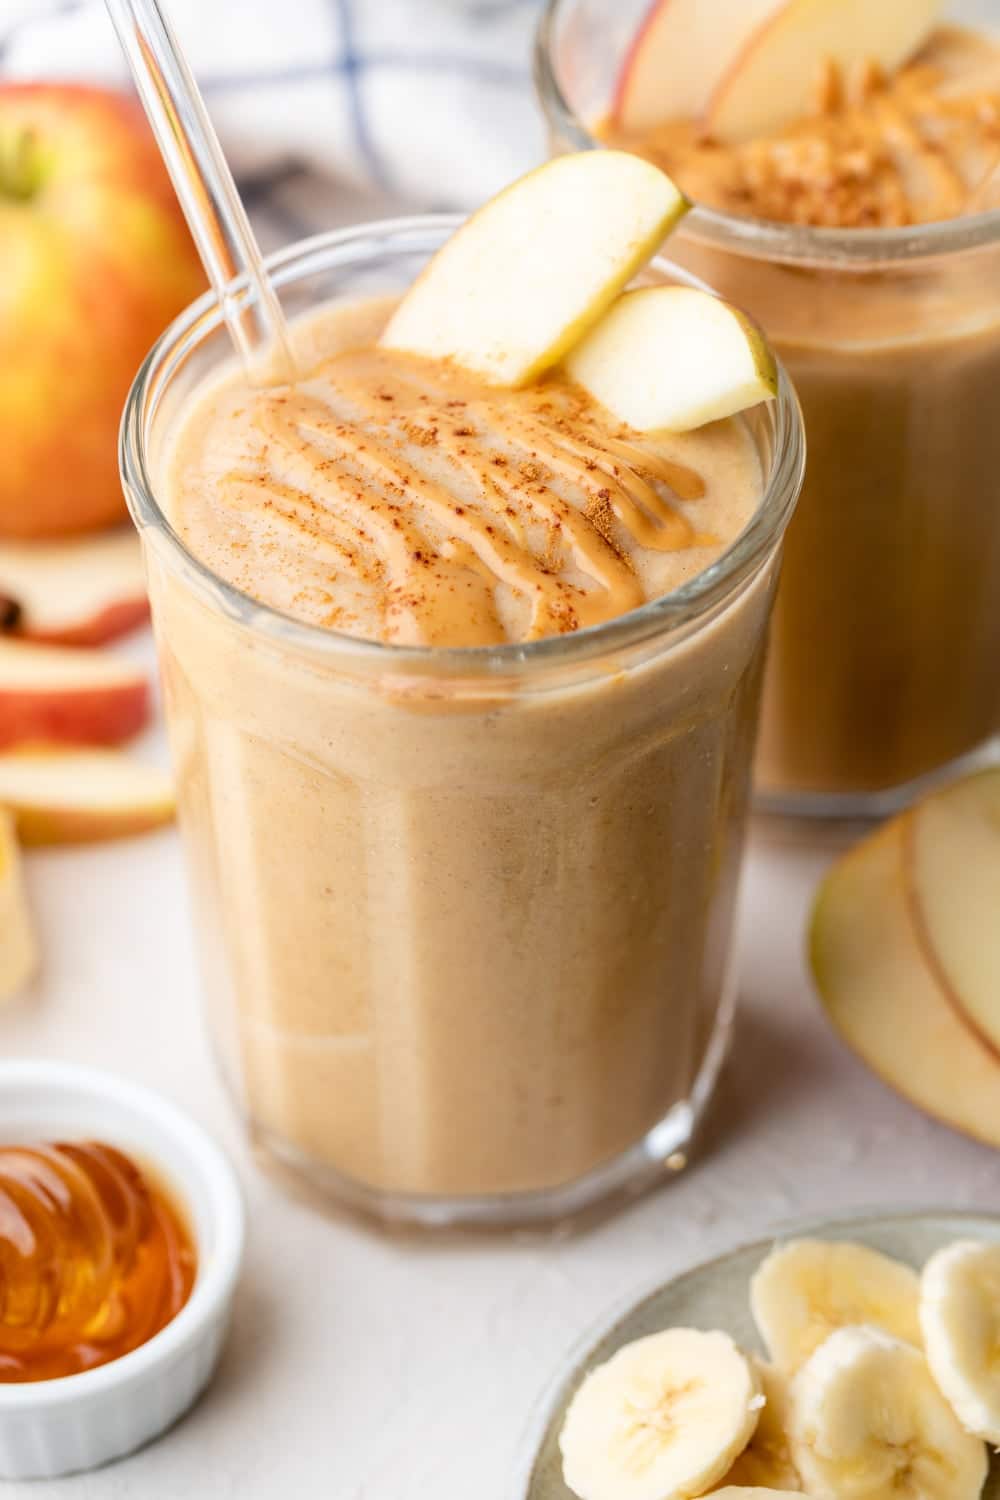 A tall smoothie with apples, bananas, and a drizzle of caramel sauce on top.